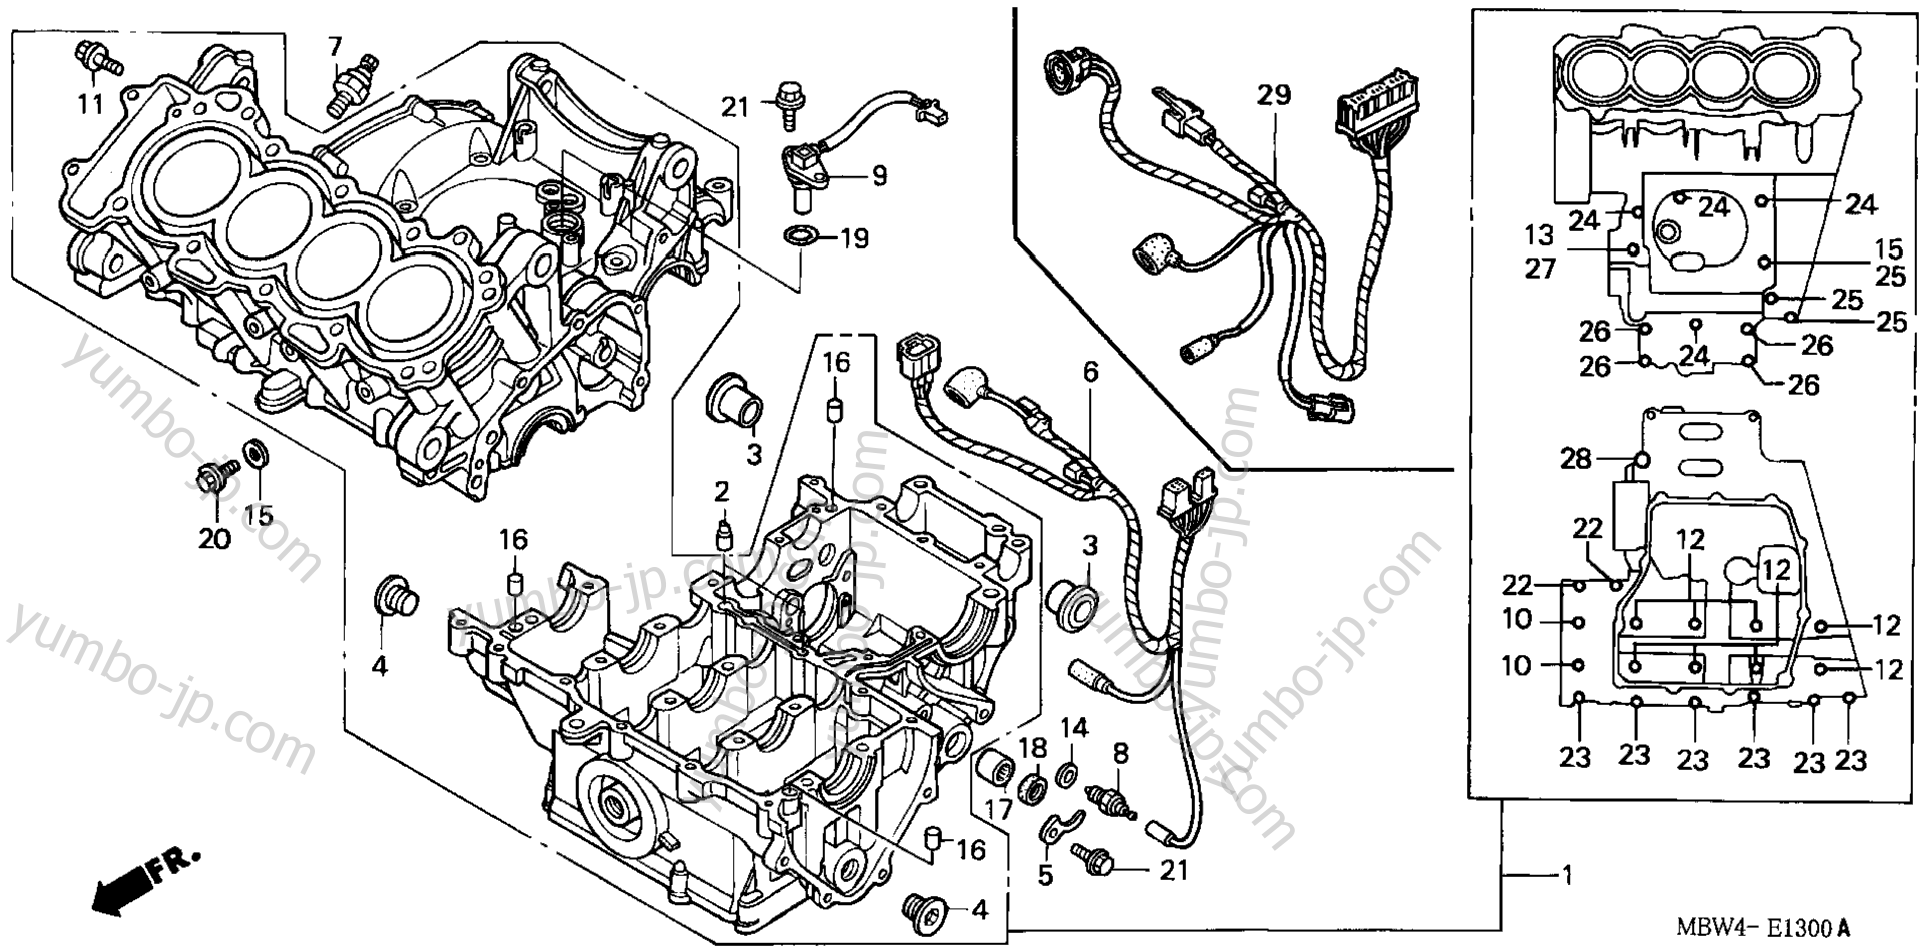 CRANKCASE for motorcycles HONDA CBR600F4 A 2000 year